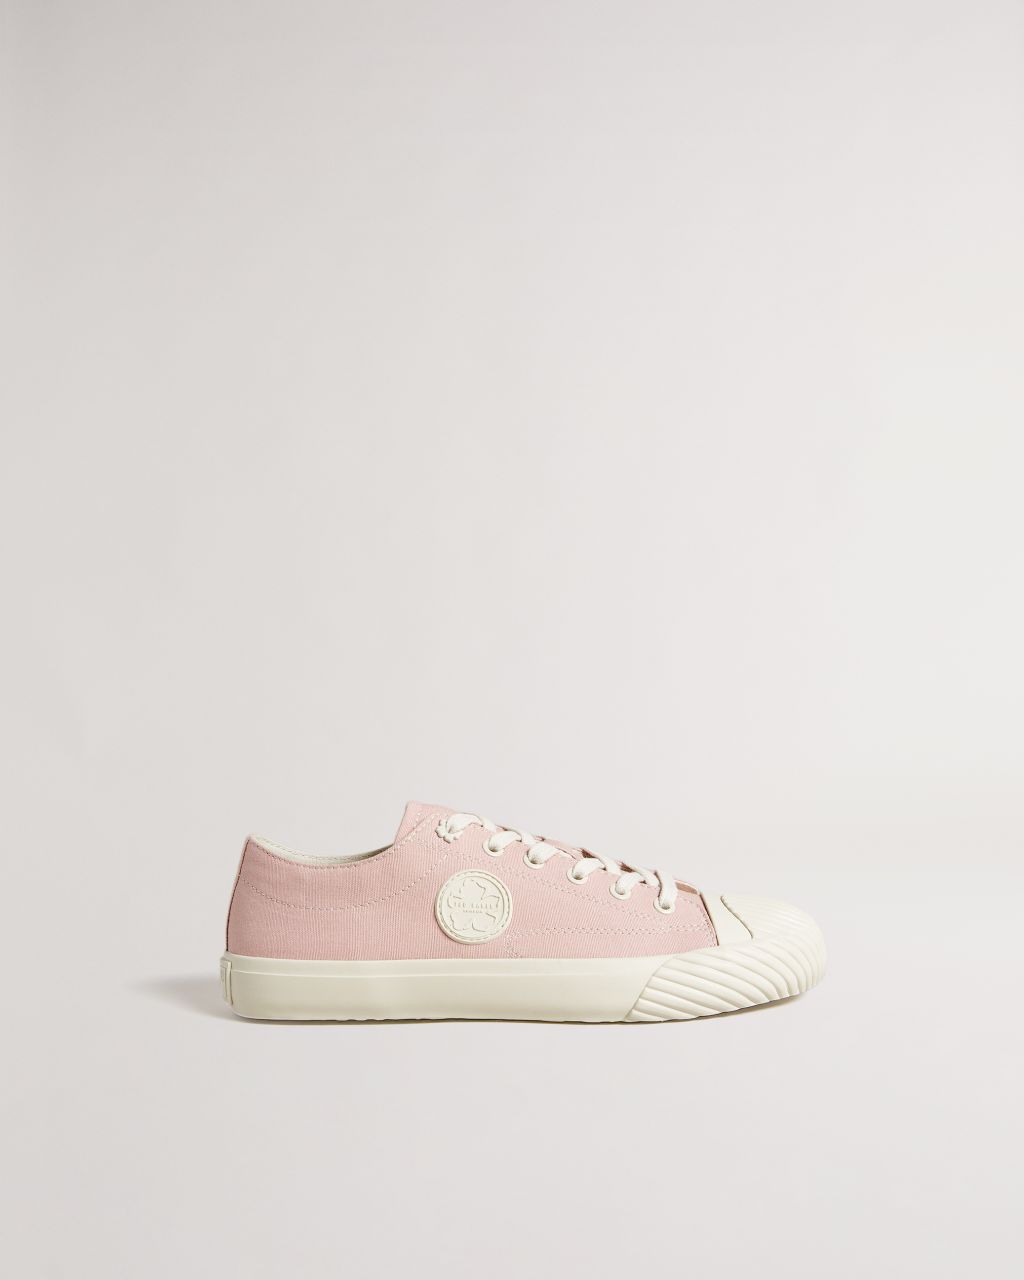 Ted Baker Women's Canvas Low Top Trainers in Dusky Pink, Tayni, Cotton